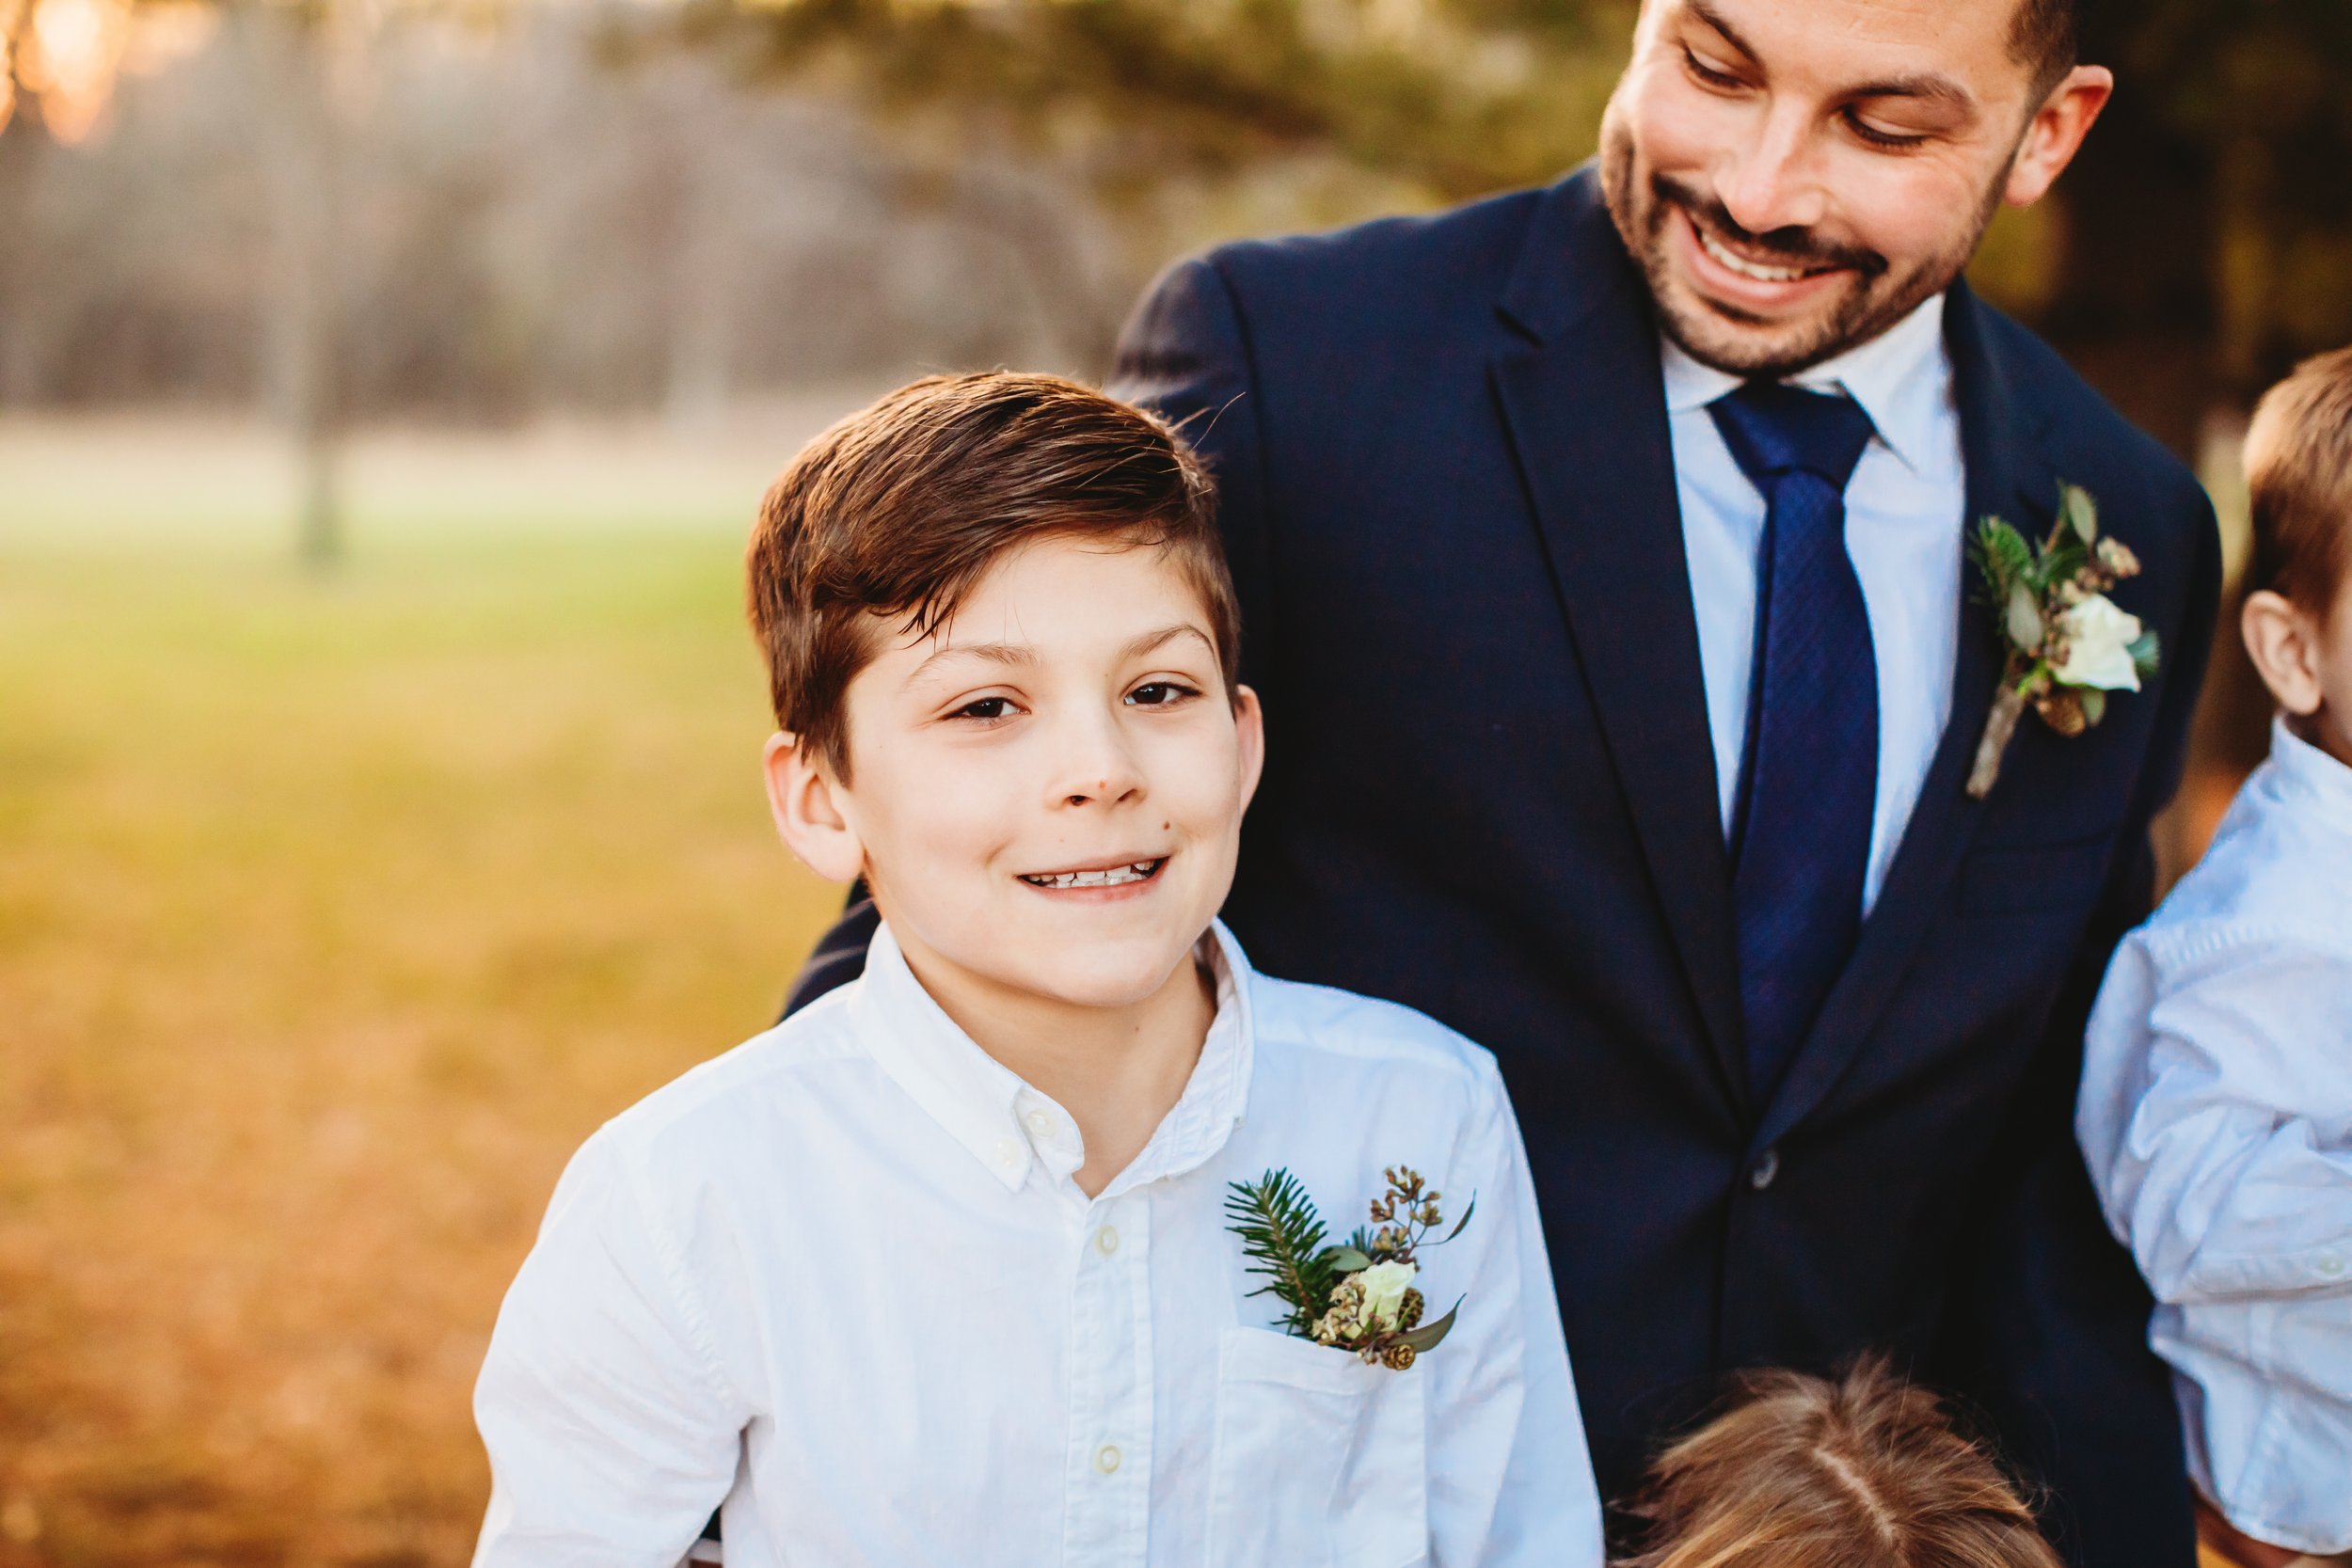  A boy smiles with his dad the groom at Ironwood on the Vermillion in IL by Teala Ward Photography. Son and groom navy tie winter wedding flowers #tealawardphotography #tealawardweddings #LaSalleIllinois #IronwoodontheVermillion #weddingphotographyIL